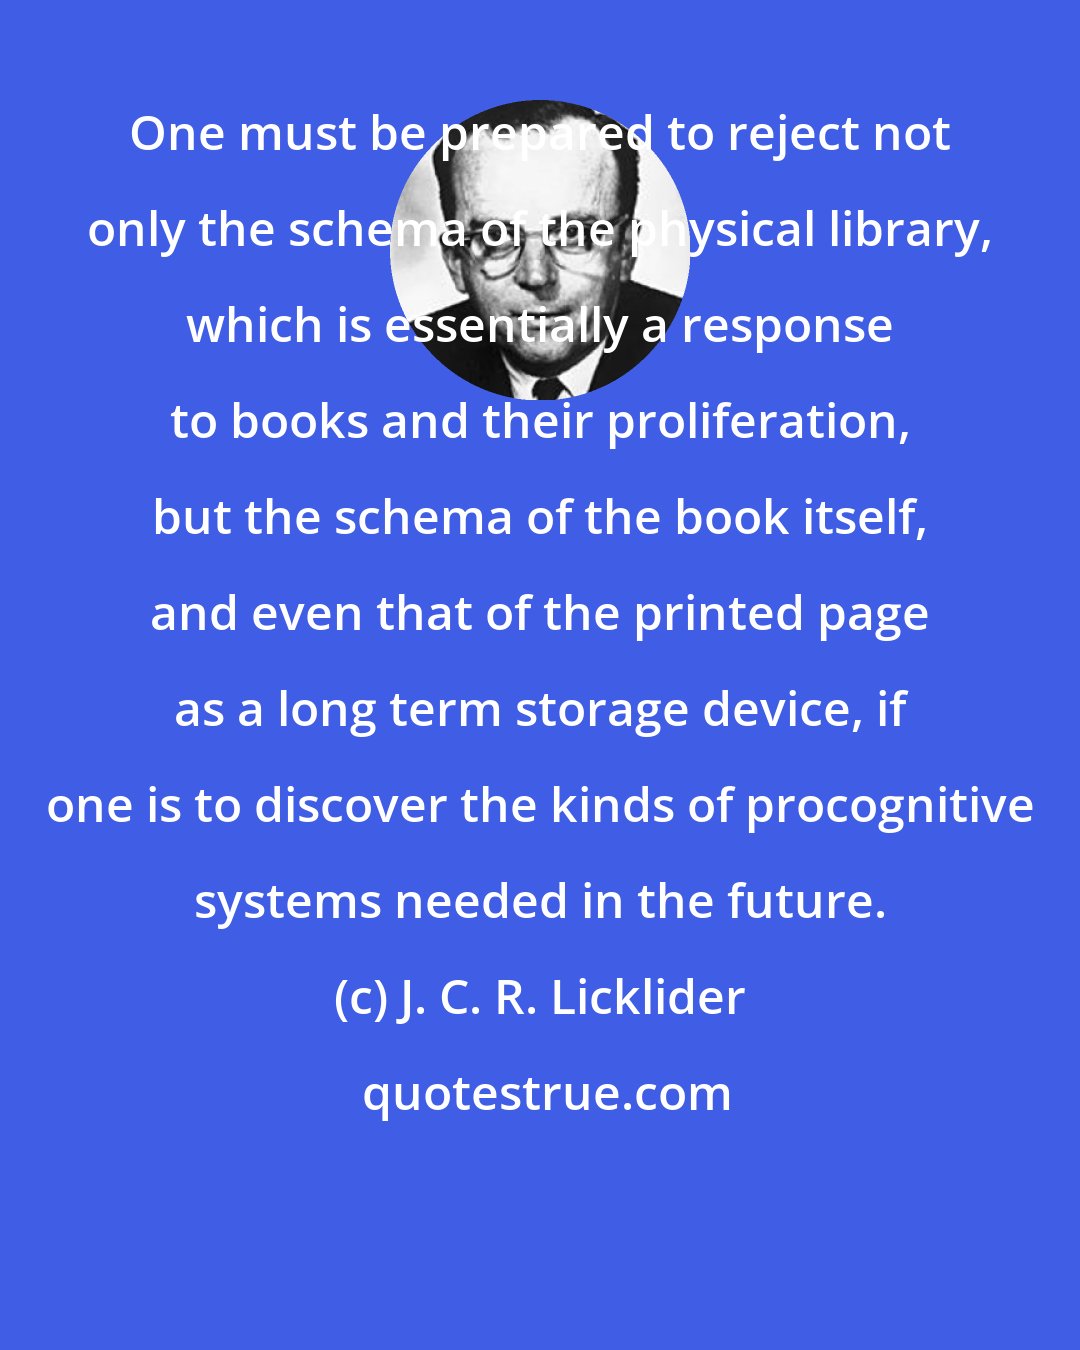 J. C. R. Licklider: One must be prepared to reject not only the schema of the physical library, which is essentially a response to books and their proliferation, but the schema of the book itself, and even that of the printed page as a long term storage device, if one is to discover the kinds of procognitive systems needed in the future.